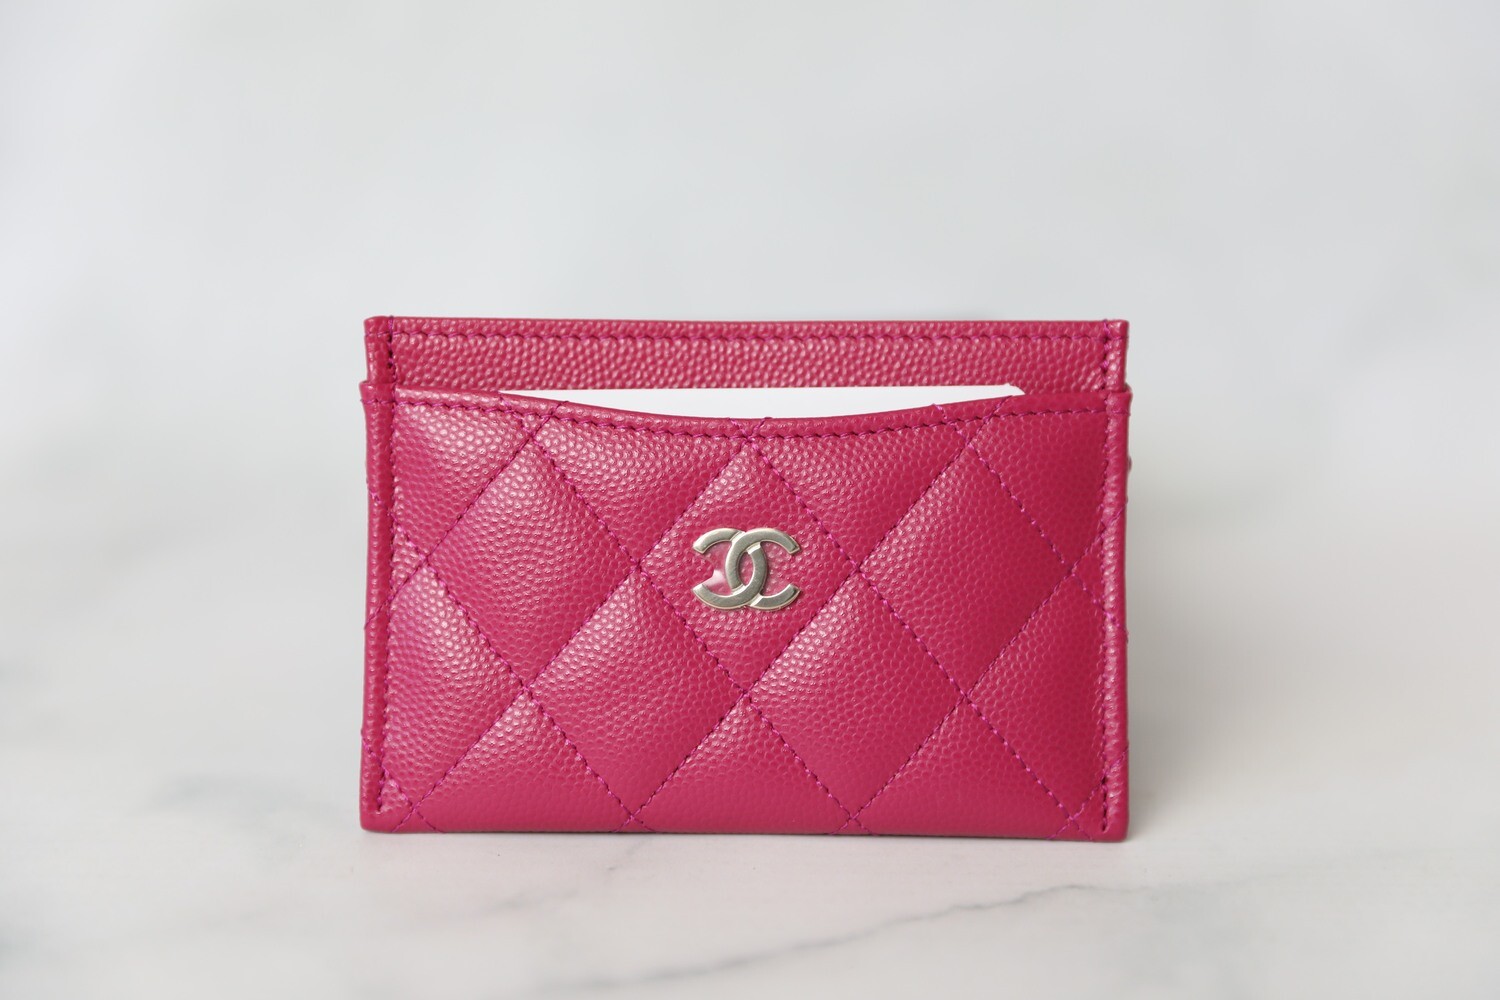 Chanel SLG Flat Cardholder, Pink Caviar with Gold Hardware, New in Box WA001